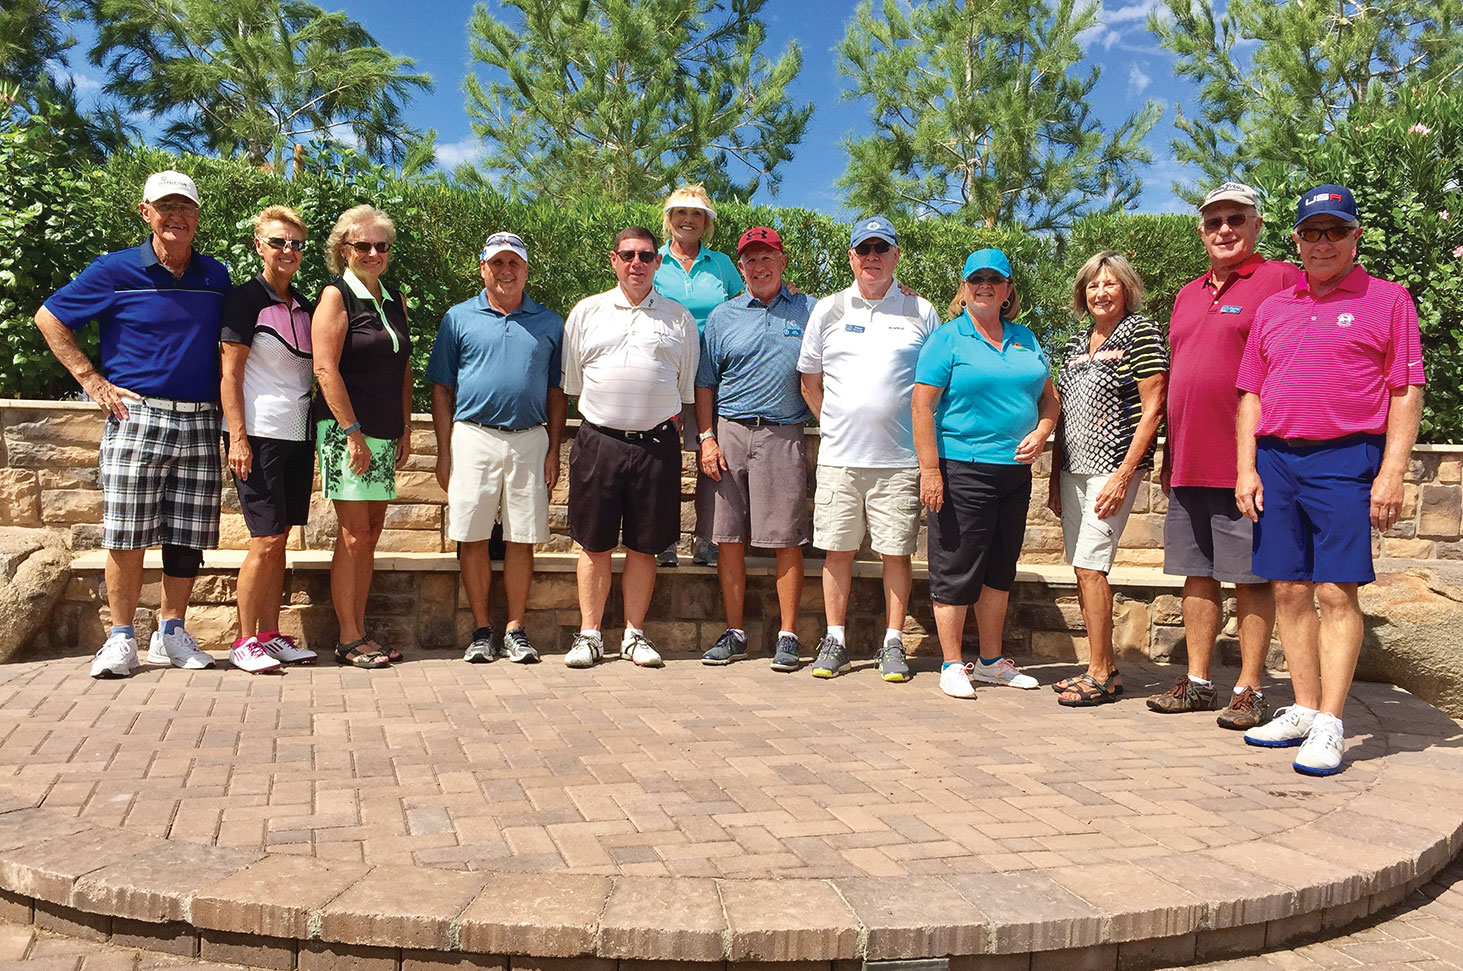 First Place Flight Winners – Summer Survivor Tournament, left to right: James Seith, Deb Smedley, Judy Hauser, Tim Mohler, Scott Giles, Kathy Mitchell, Mike Nadon, Dave Kennedy, Peggy Taylor, C. Lipetzky, Charlie Wiley, Jim Palmer